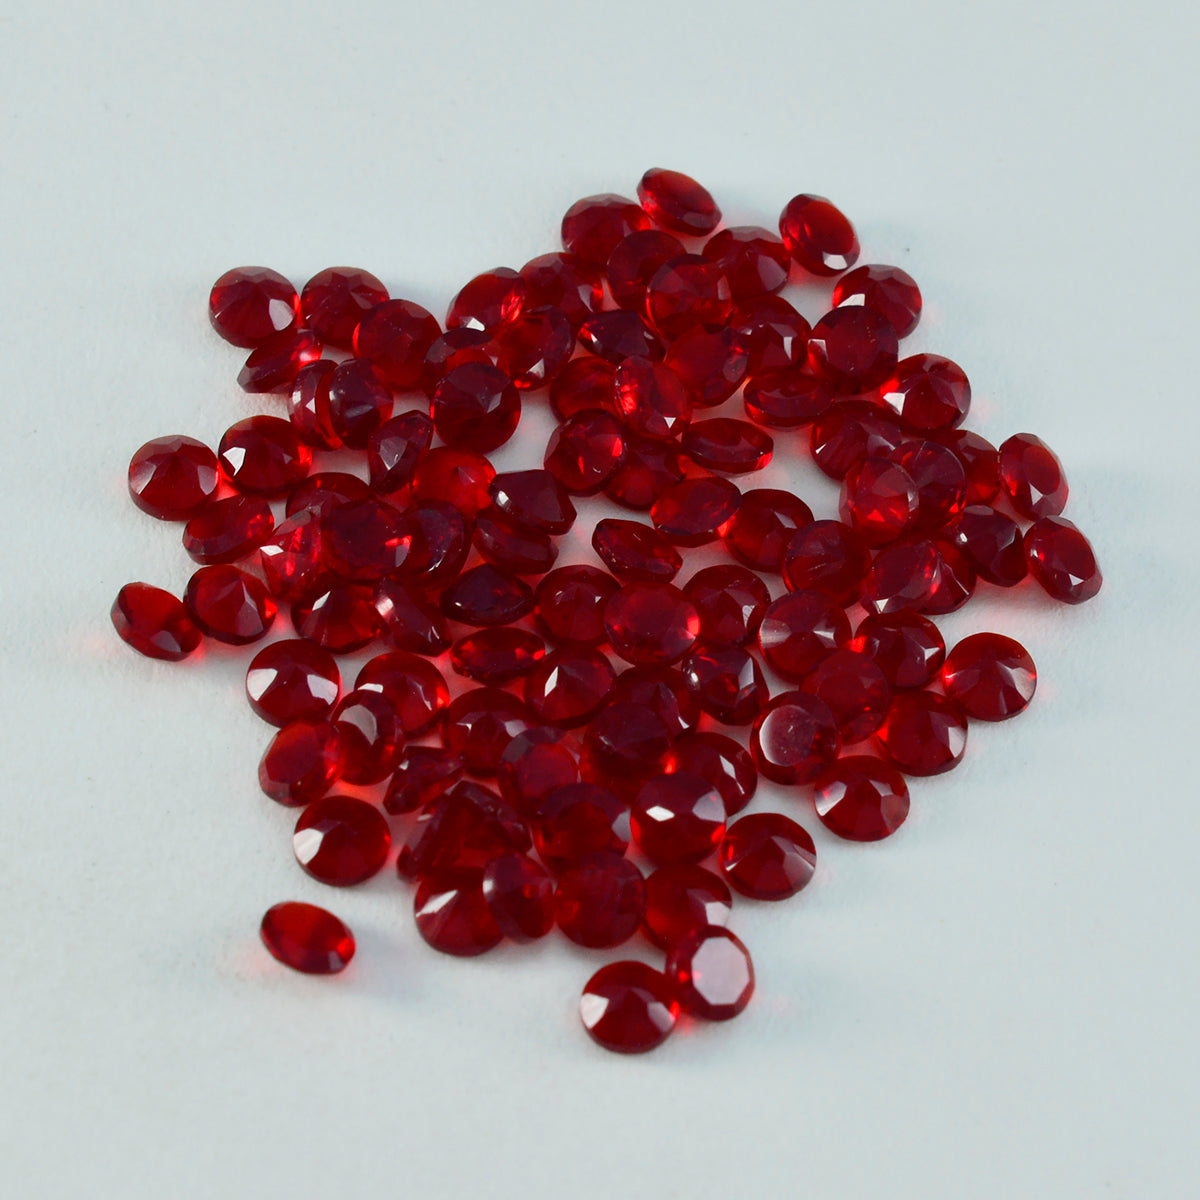 Riyogems 1PC Red Ruby CZ Faceted 2x2 mm Round Shape AAA Quality Gem